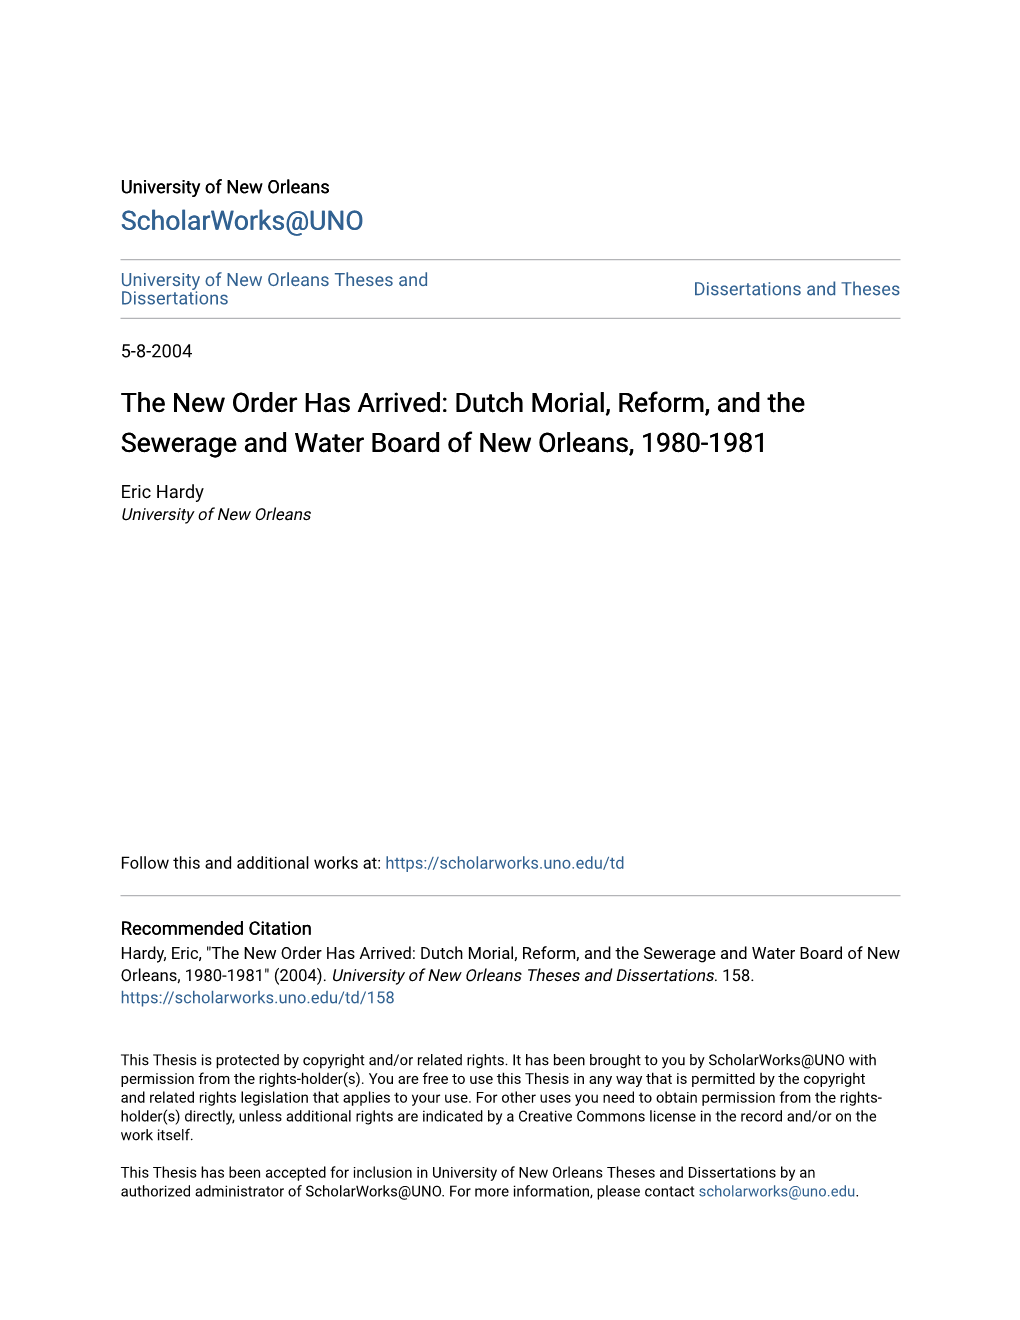 Dutch Morial, Reform, and the Sewerage and Water Board of New Orleans, 1980-1981